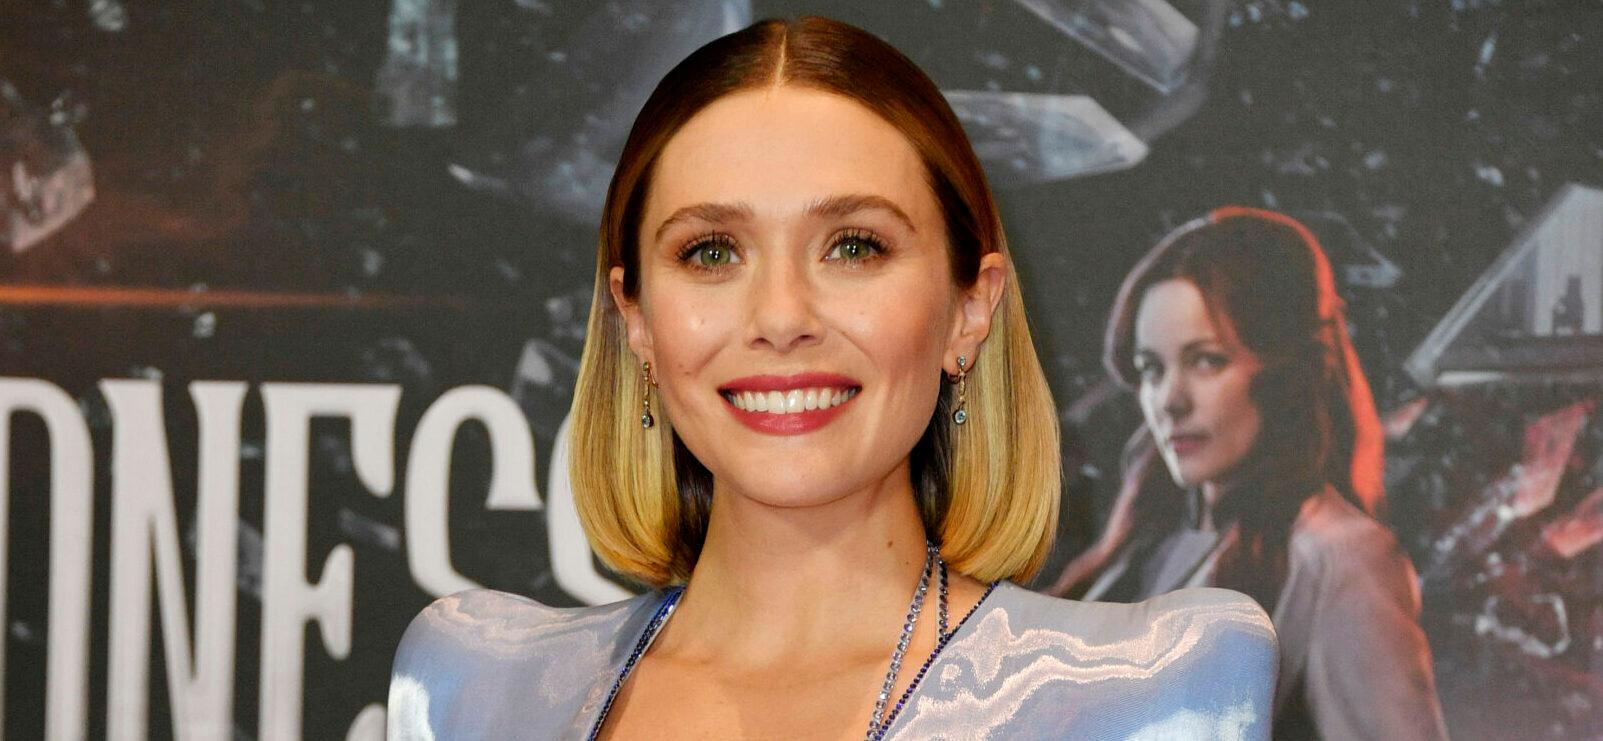 Elizabeth Olsen Says Doing Her Own Stunts In Marvel Films Was ‘A Waste Of Everyone’s Time’